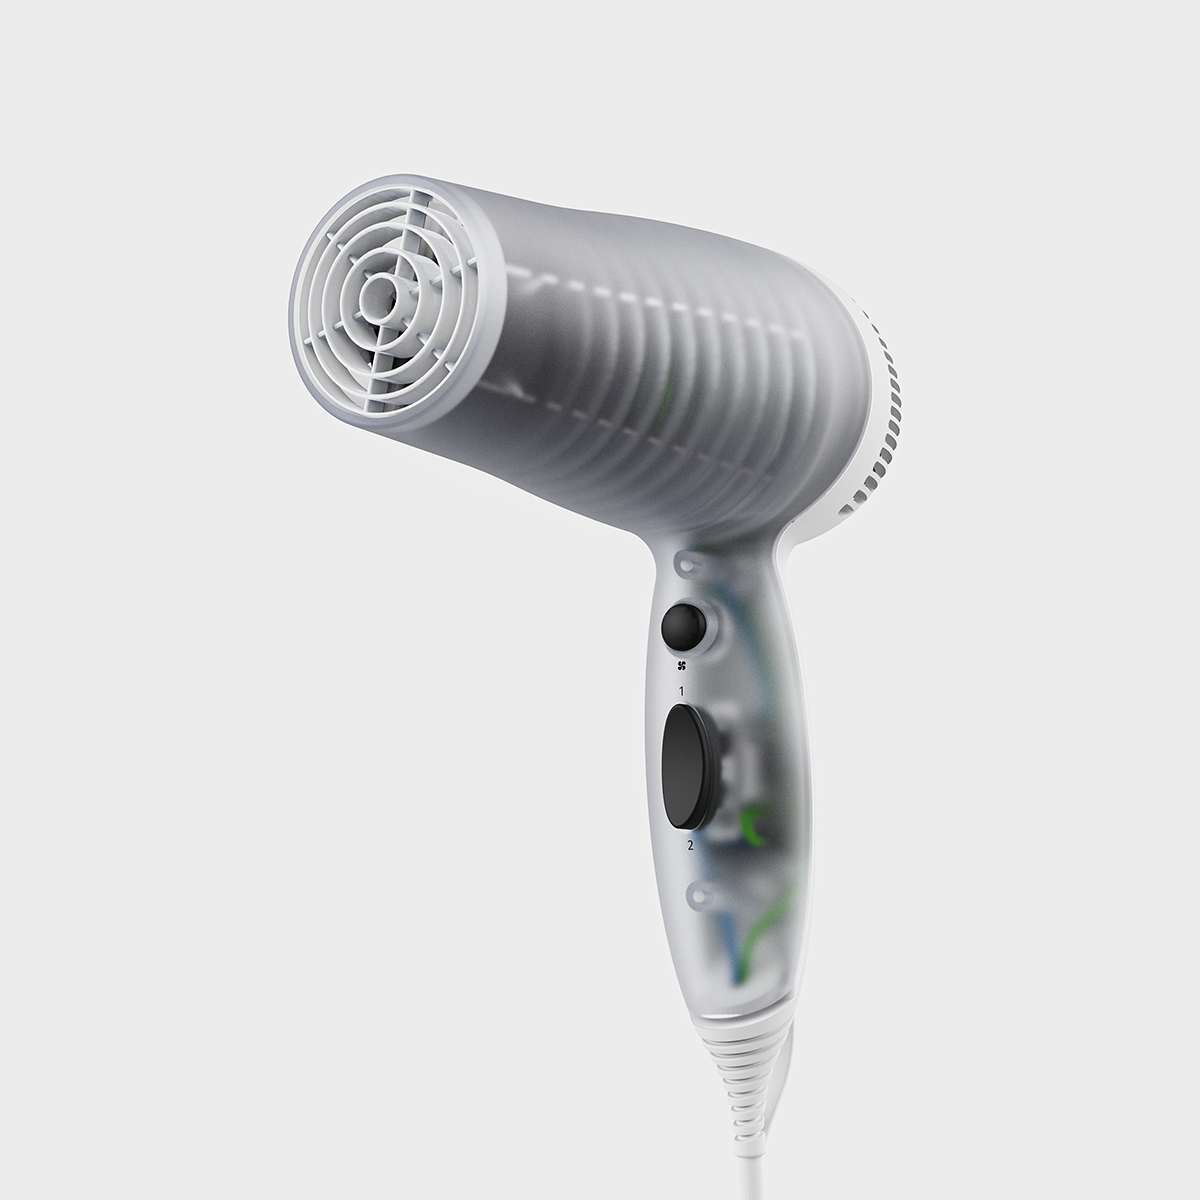 Rendering of a translucent hairdryer, unplugged